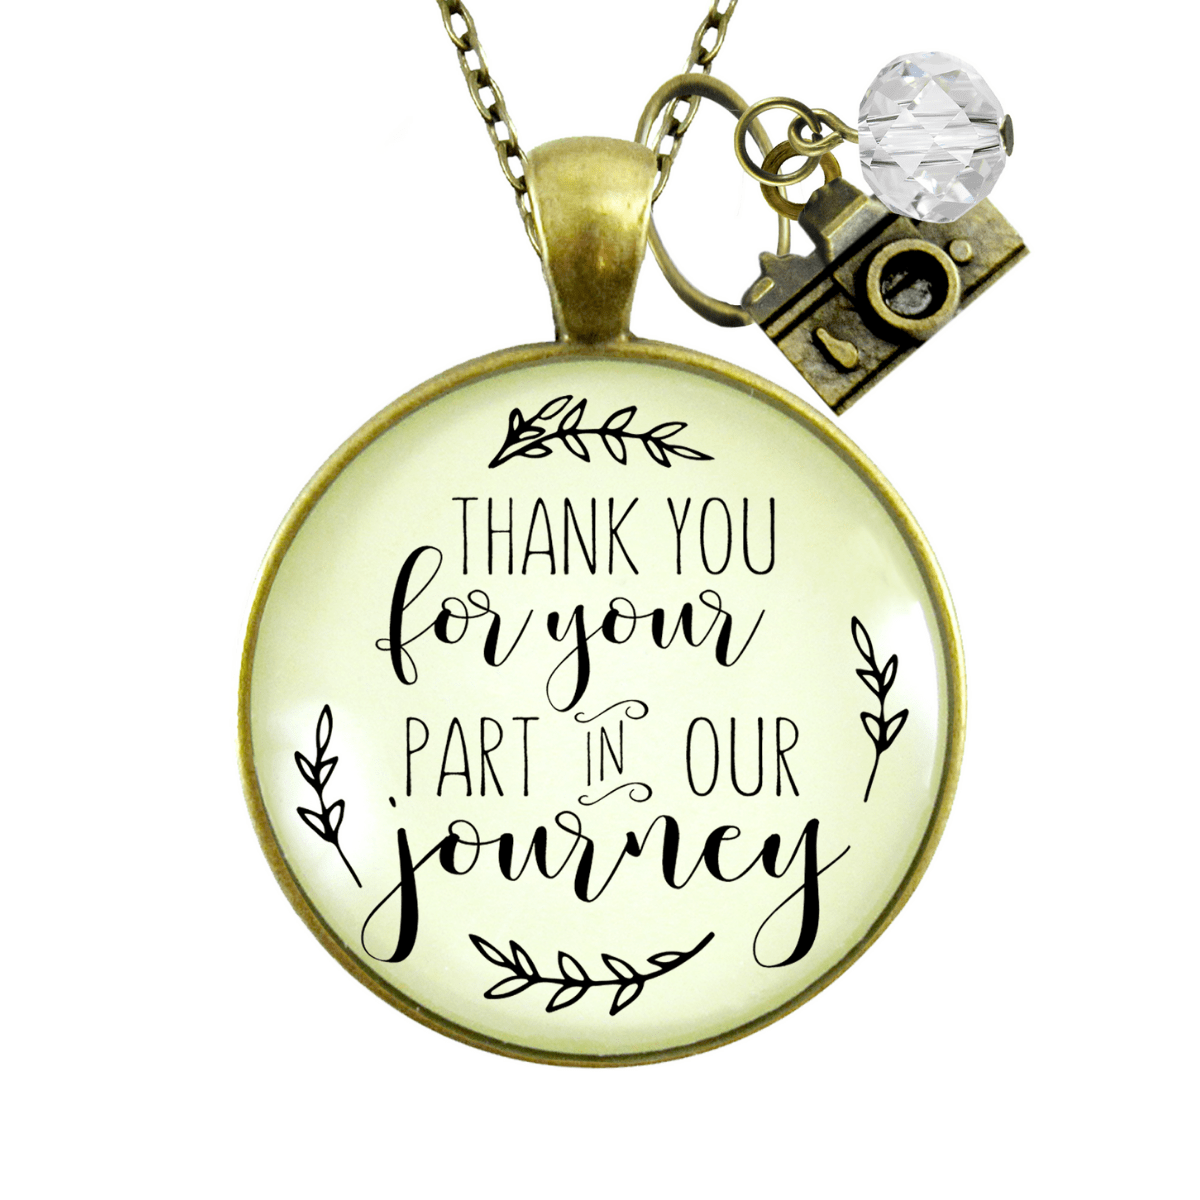 Gutsy Goodness Wedding Photographer Gift Necklace Thank You for Part Camera Charm - Gutsy Goodness Handmade Jewelry;Wedding Photographer Gift Necklace Thank You For Part Camera Charm - Gutsy Goodness Handmade Jewelry Gifts